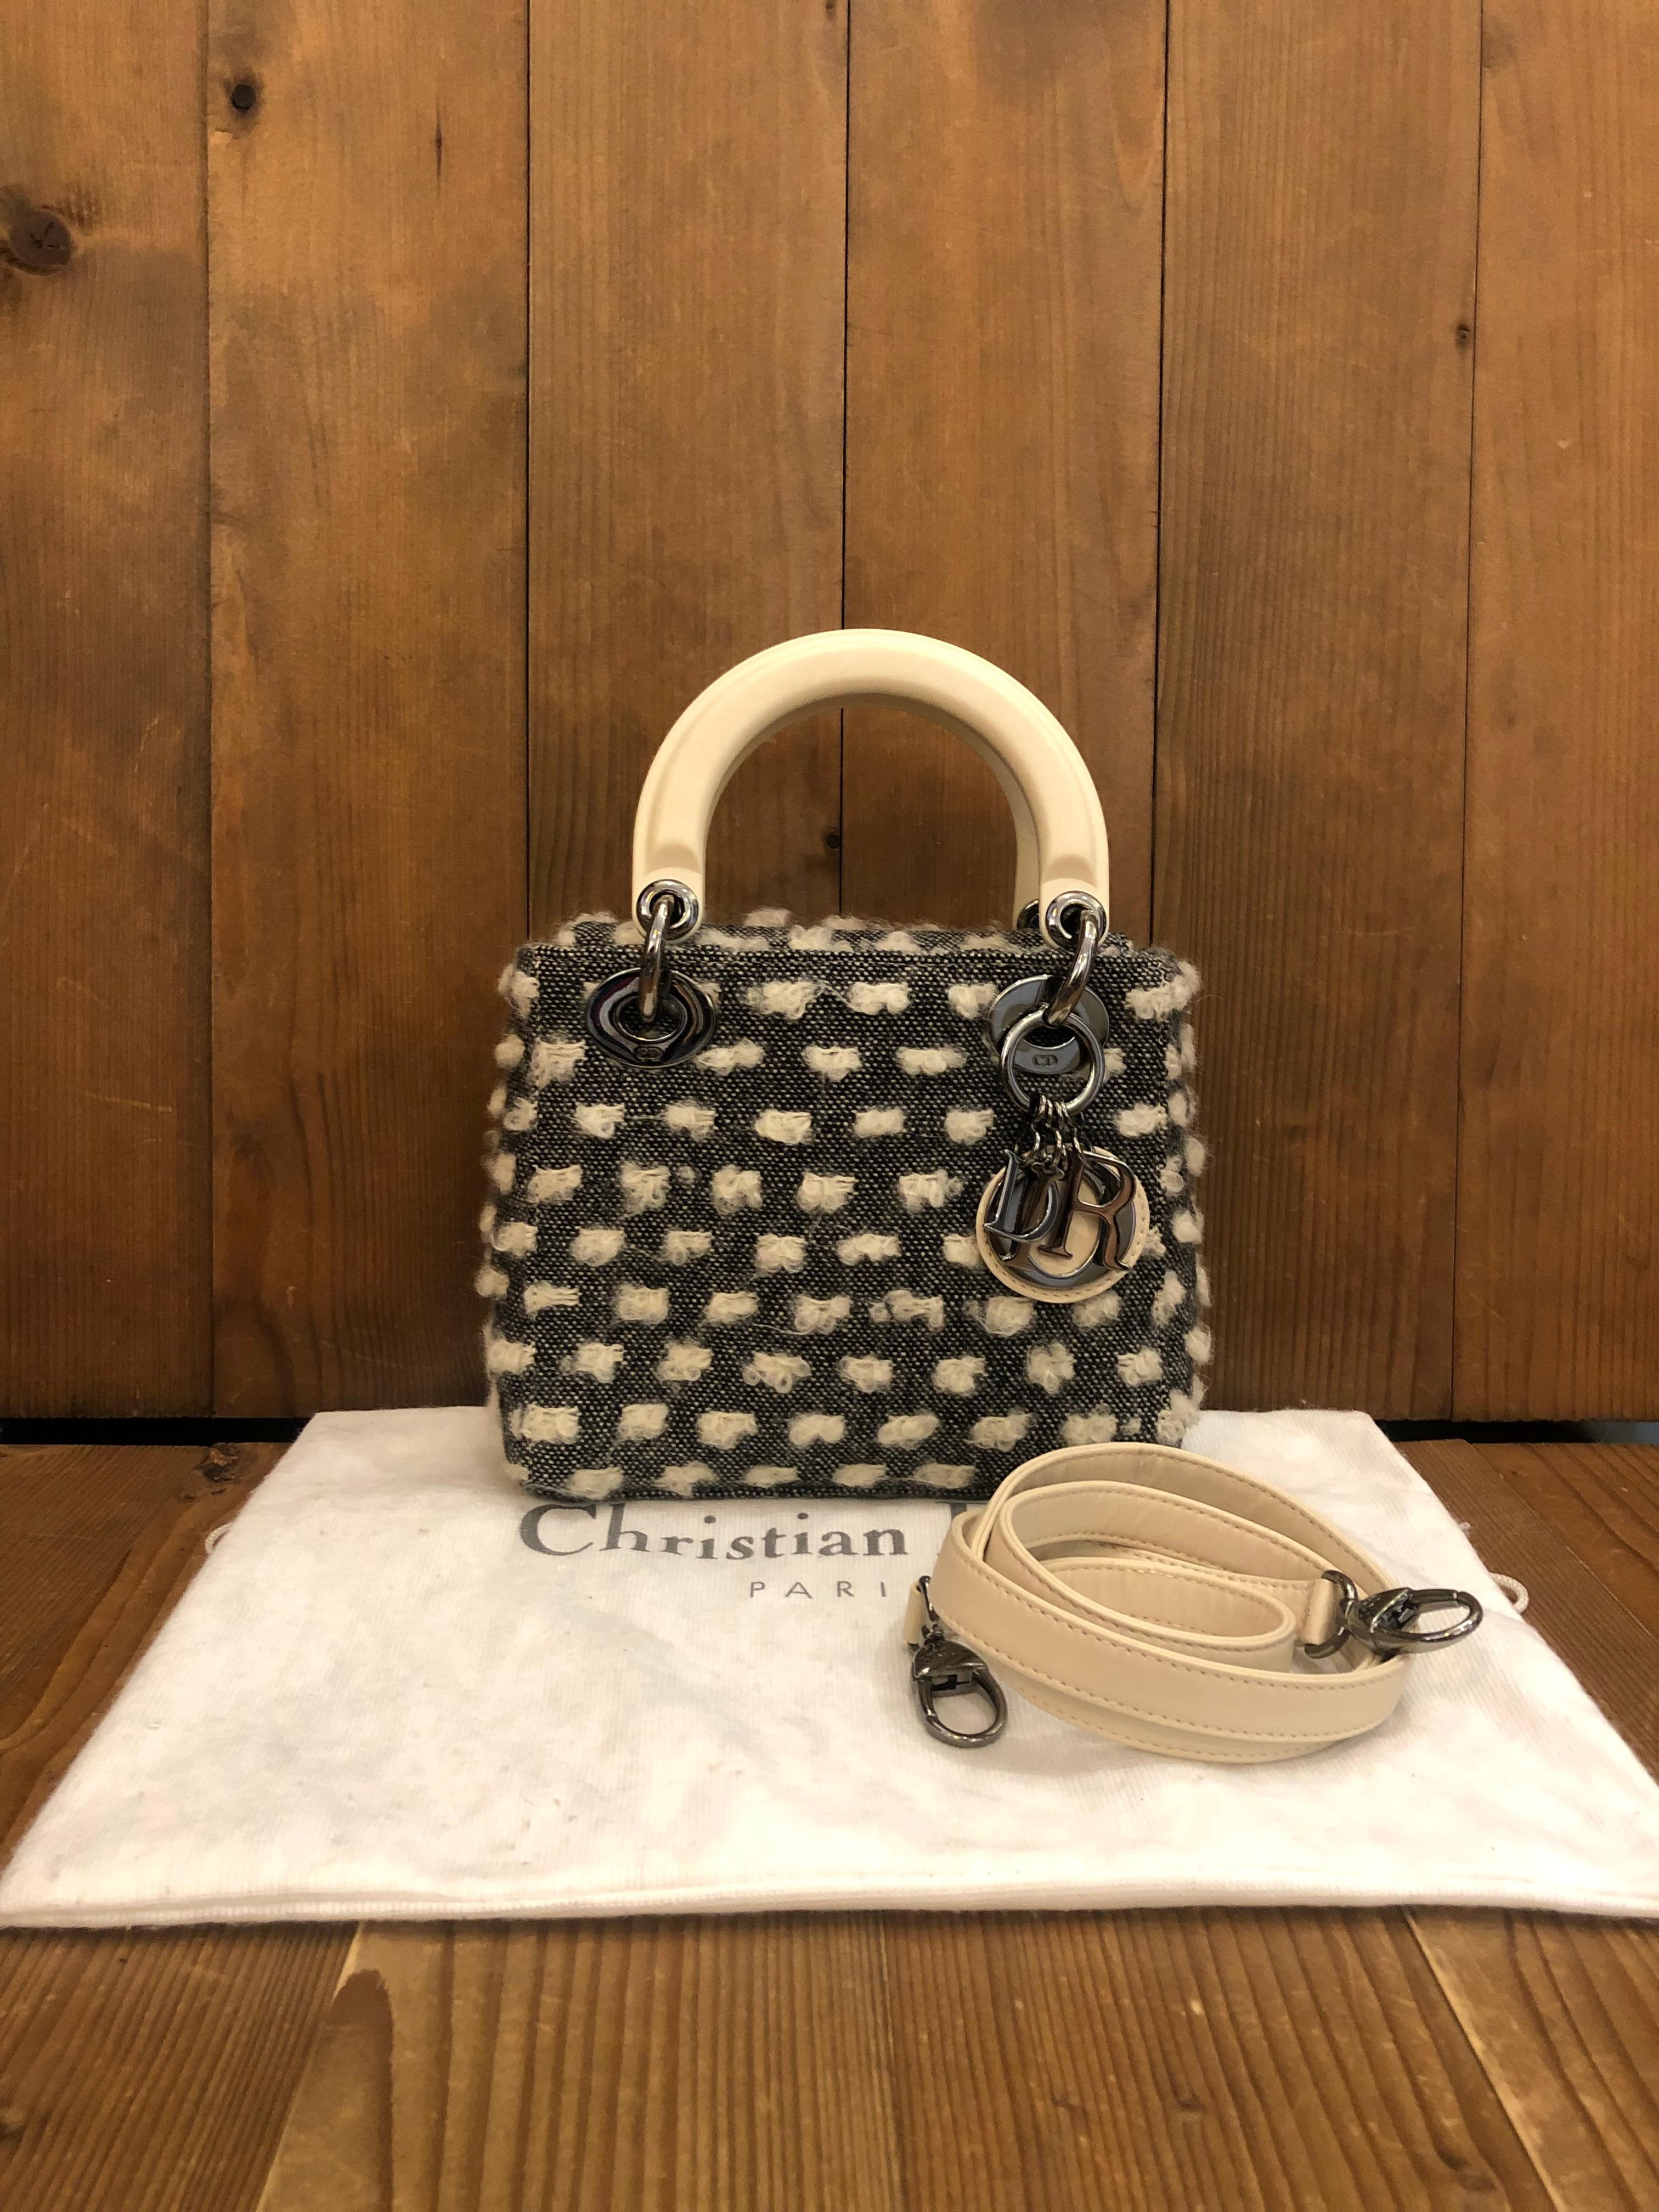 The most iconic Christian Dior handbag, the Lady Dior, in honor of Diana, Princess of Wales. It was the handbag Dior wished to give the Princess of Wales to carry on the occasion of her visit to Paris.

This mini Lady Dior is crafted of black and